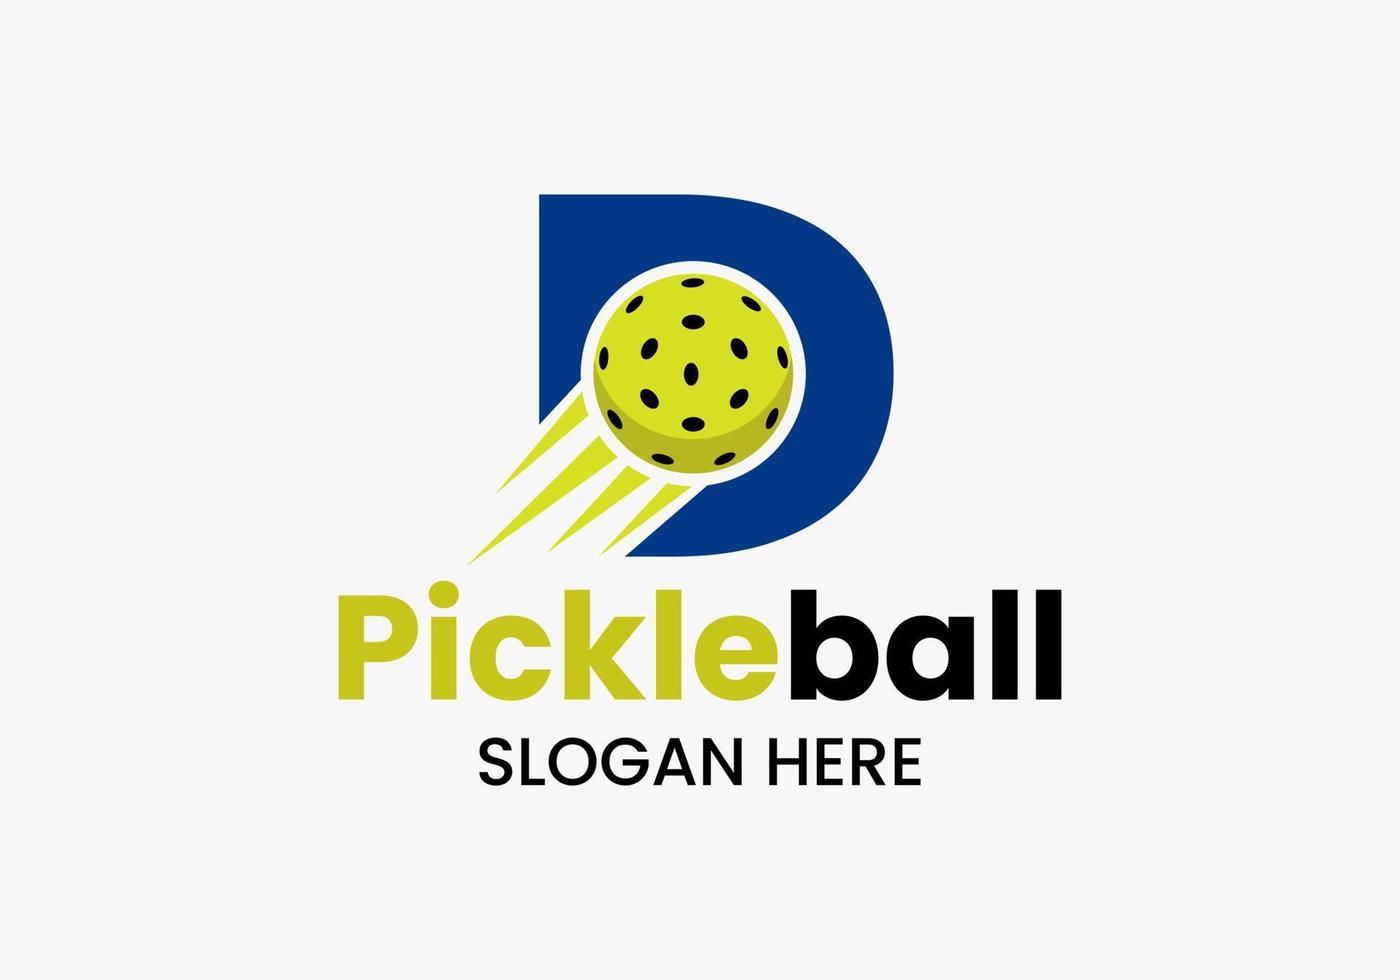 Letter D Pickleball Logo Concept With Moving Pickleball Symbol. Pickle Ball Logotype Vector Template